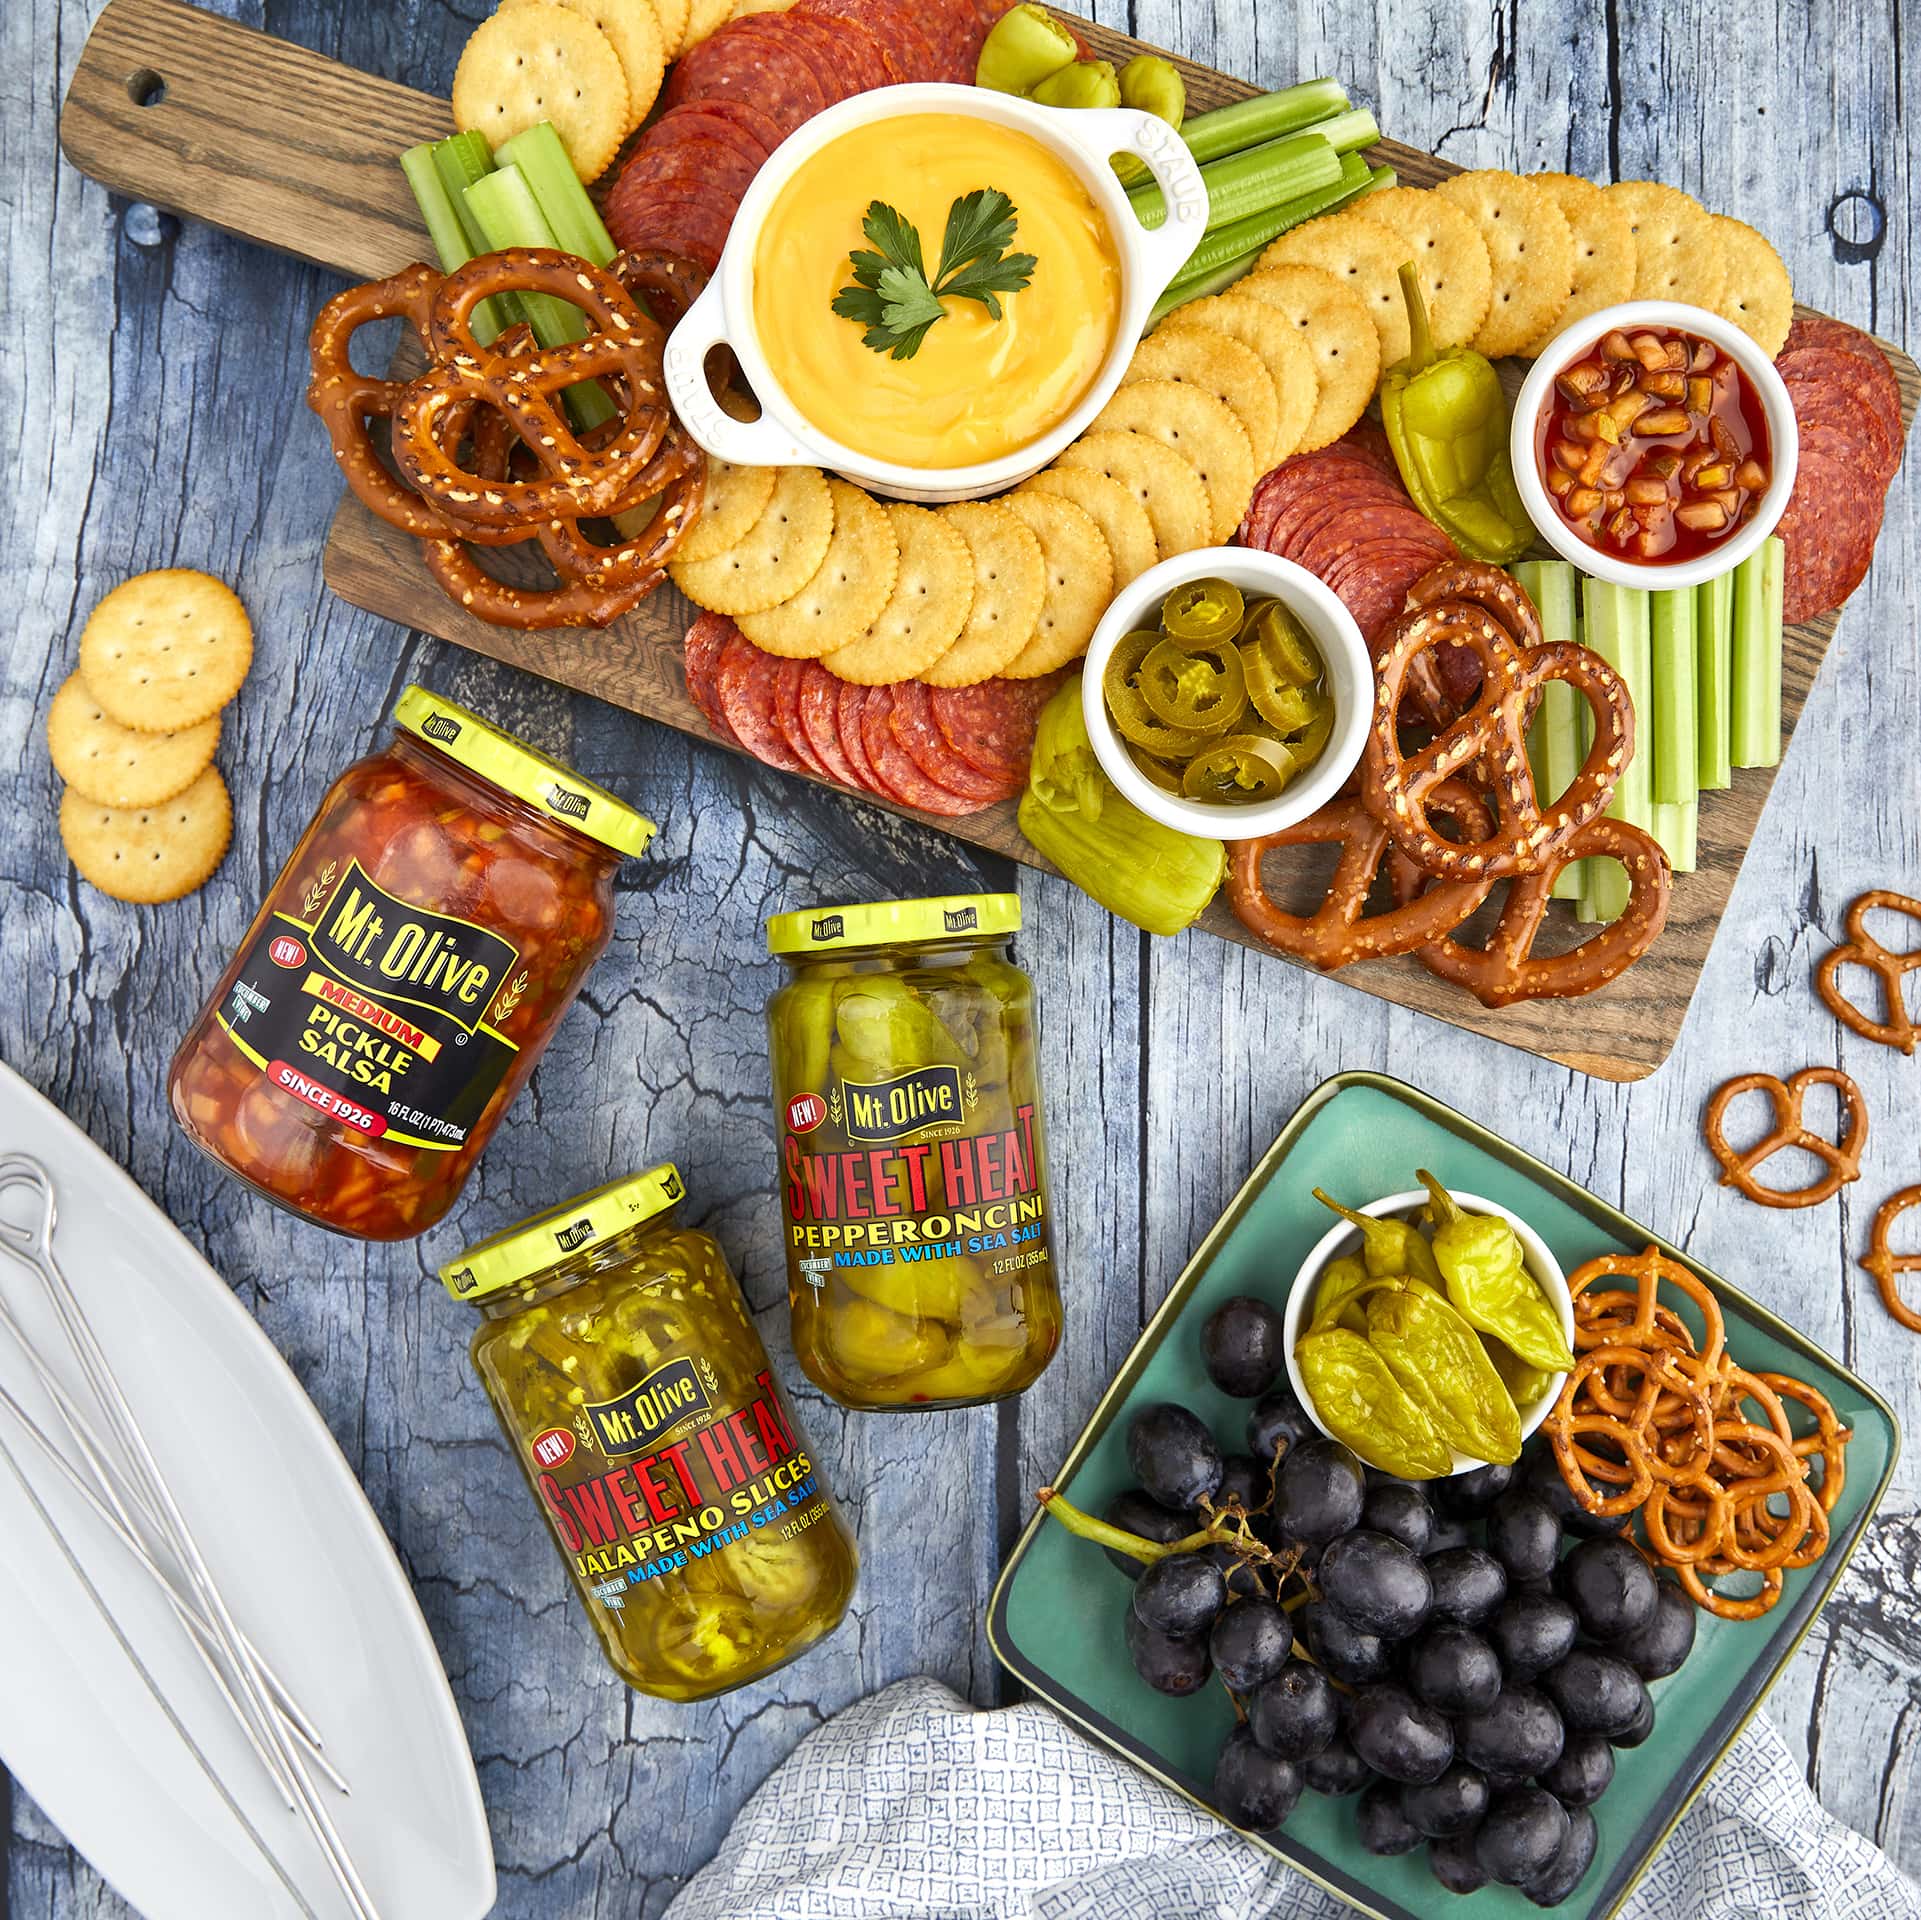 jars of Pickle Salsa, SweetHeat Pepperoncini and SweetHeat Jalapenos. Charcuterie board made of wood shows crackers, pretzels, cheese dip and dishes of pickle salsa and peppers.